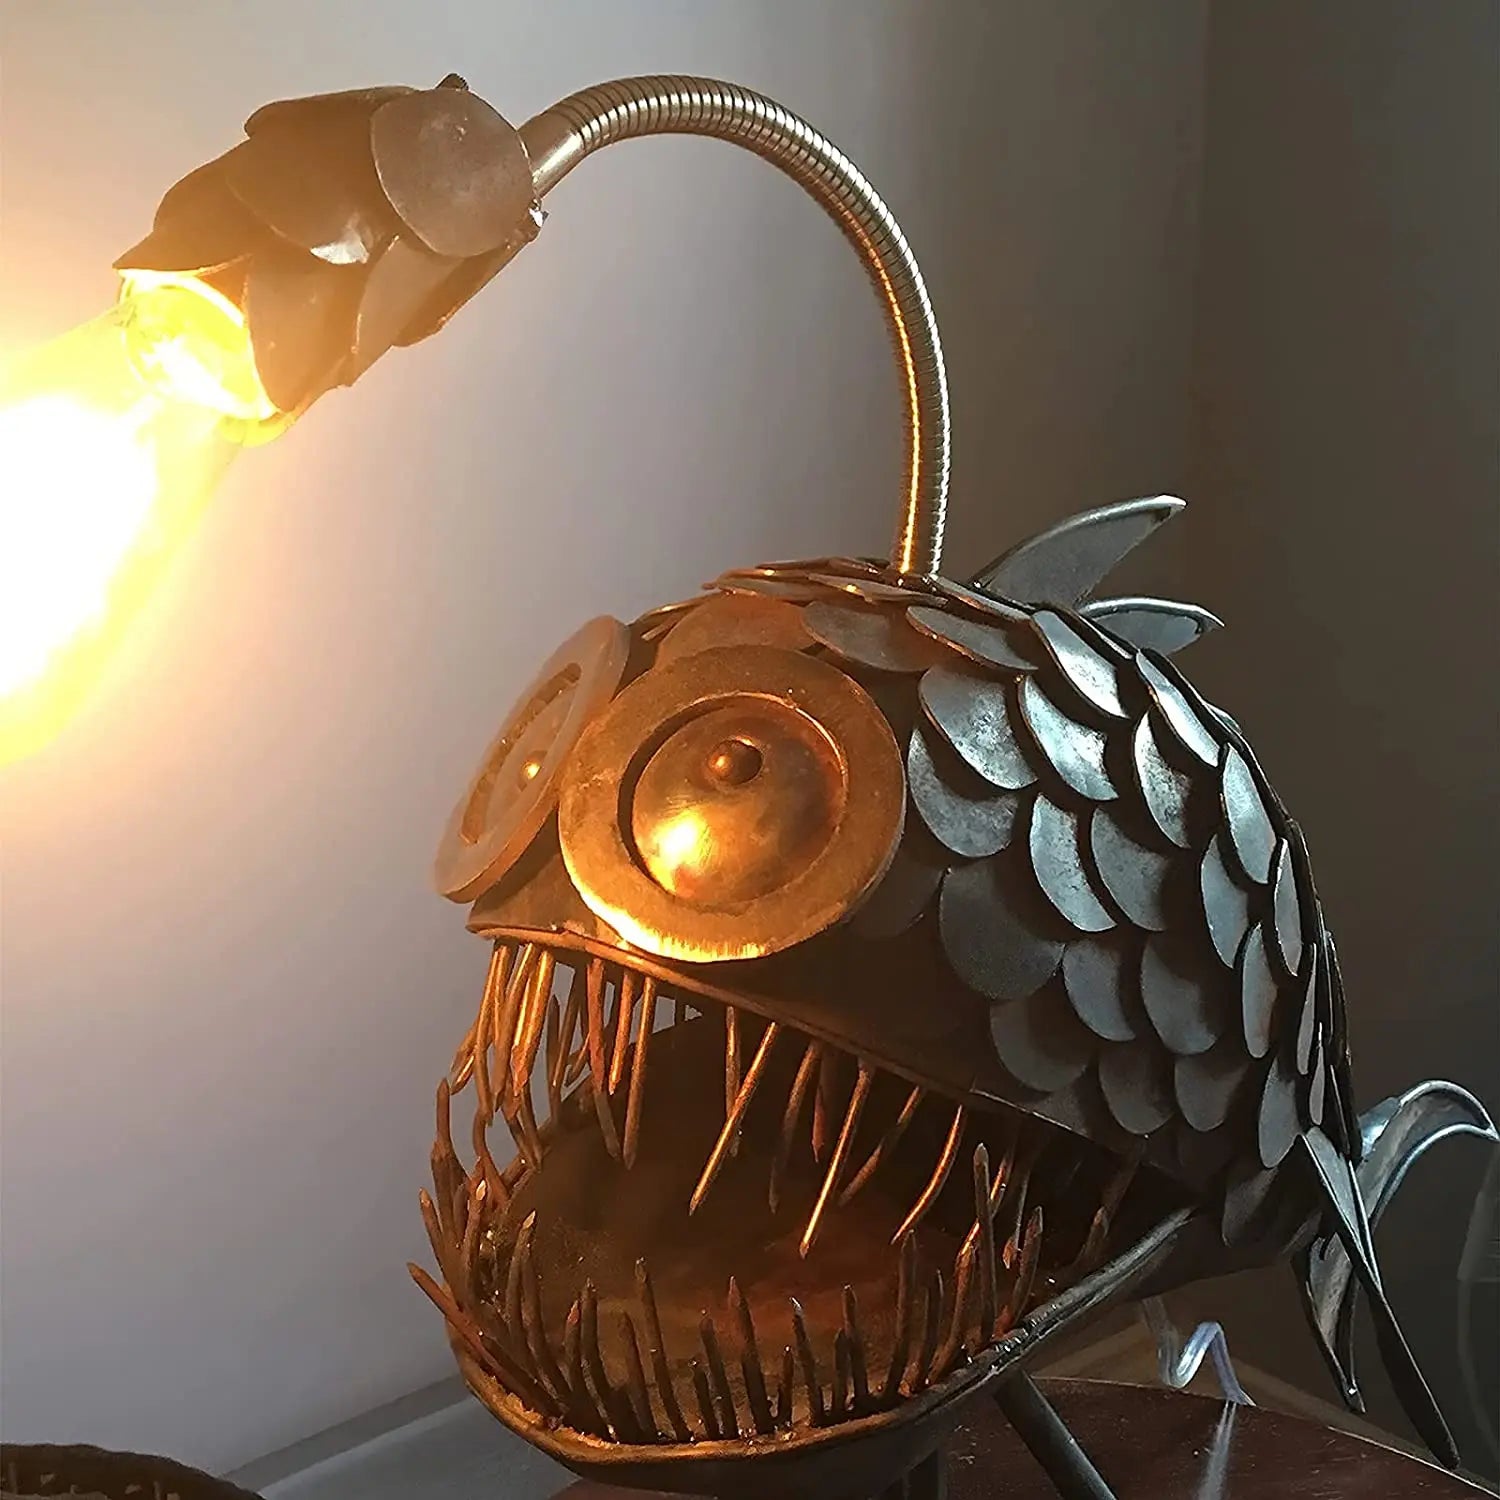 Rustik USB Angler Fish Lamp Shark Lamp Steampunk Style Table Lamp Simulation Flame Light Decoration Bedroom Home Decoration Gift